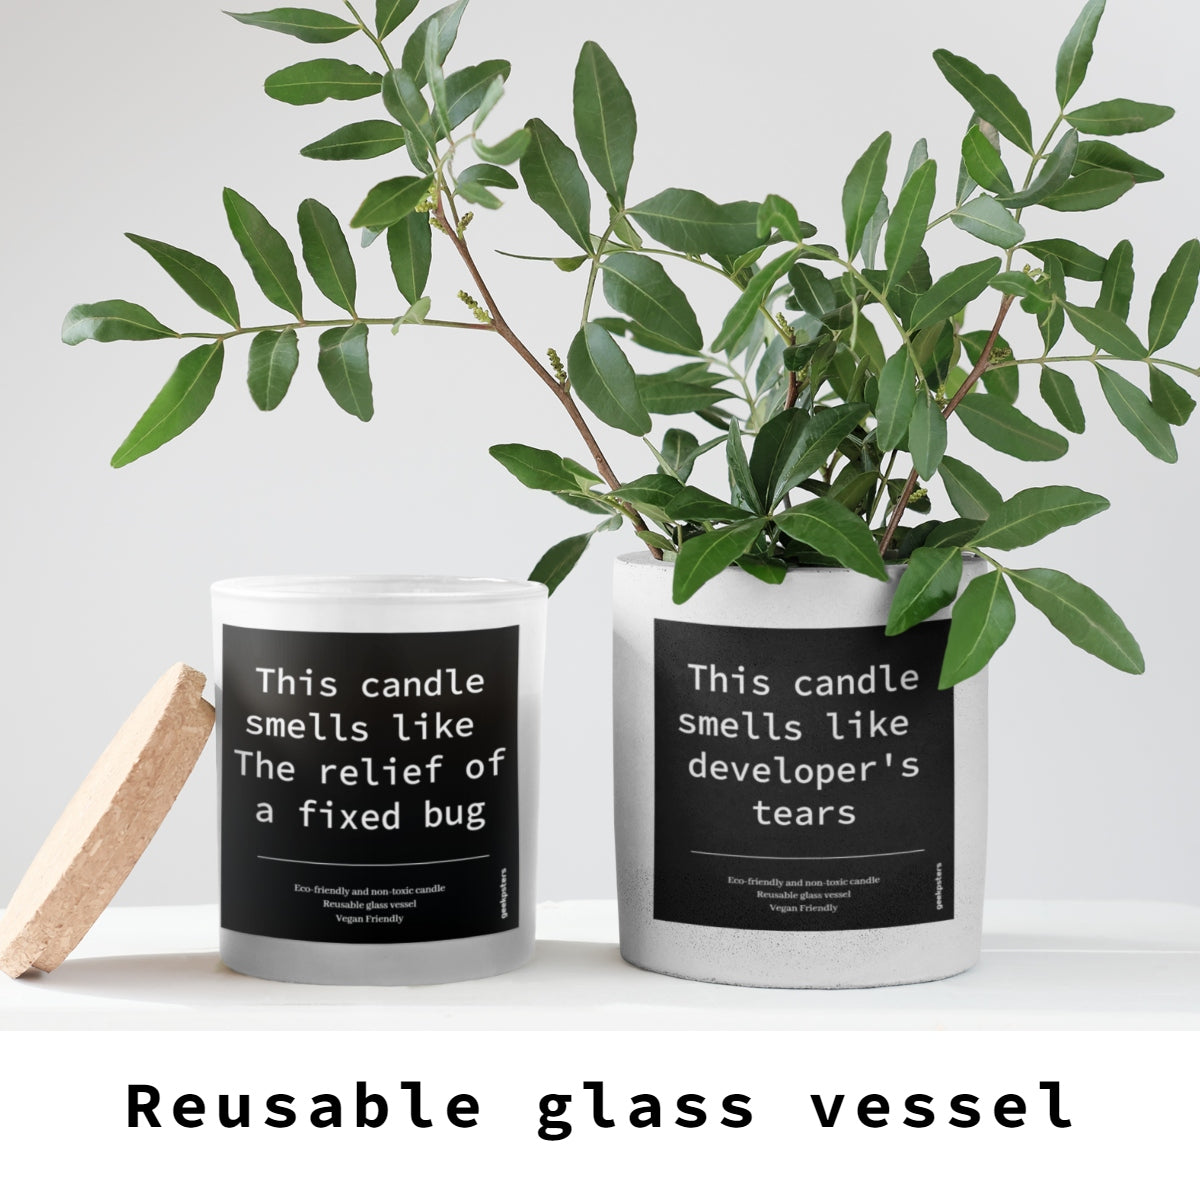 Two "This Candle Smells Like a Freshly Merged Pull Request" soy candles in reusable glass vessels with humorous labels, one labeled "the relief of a fixed bug" and the other "developer's tears," accompanied by a green plant and a piece of wood.